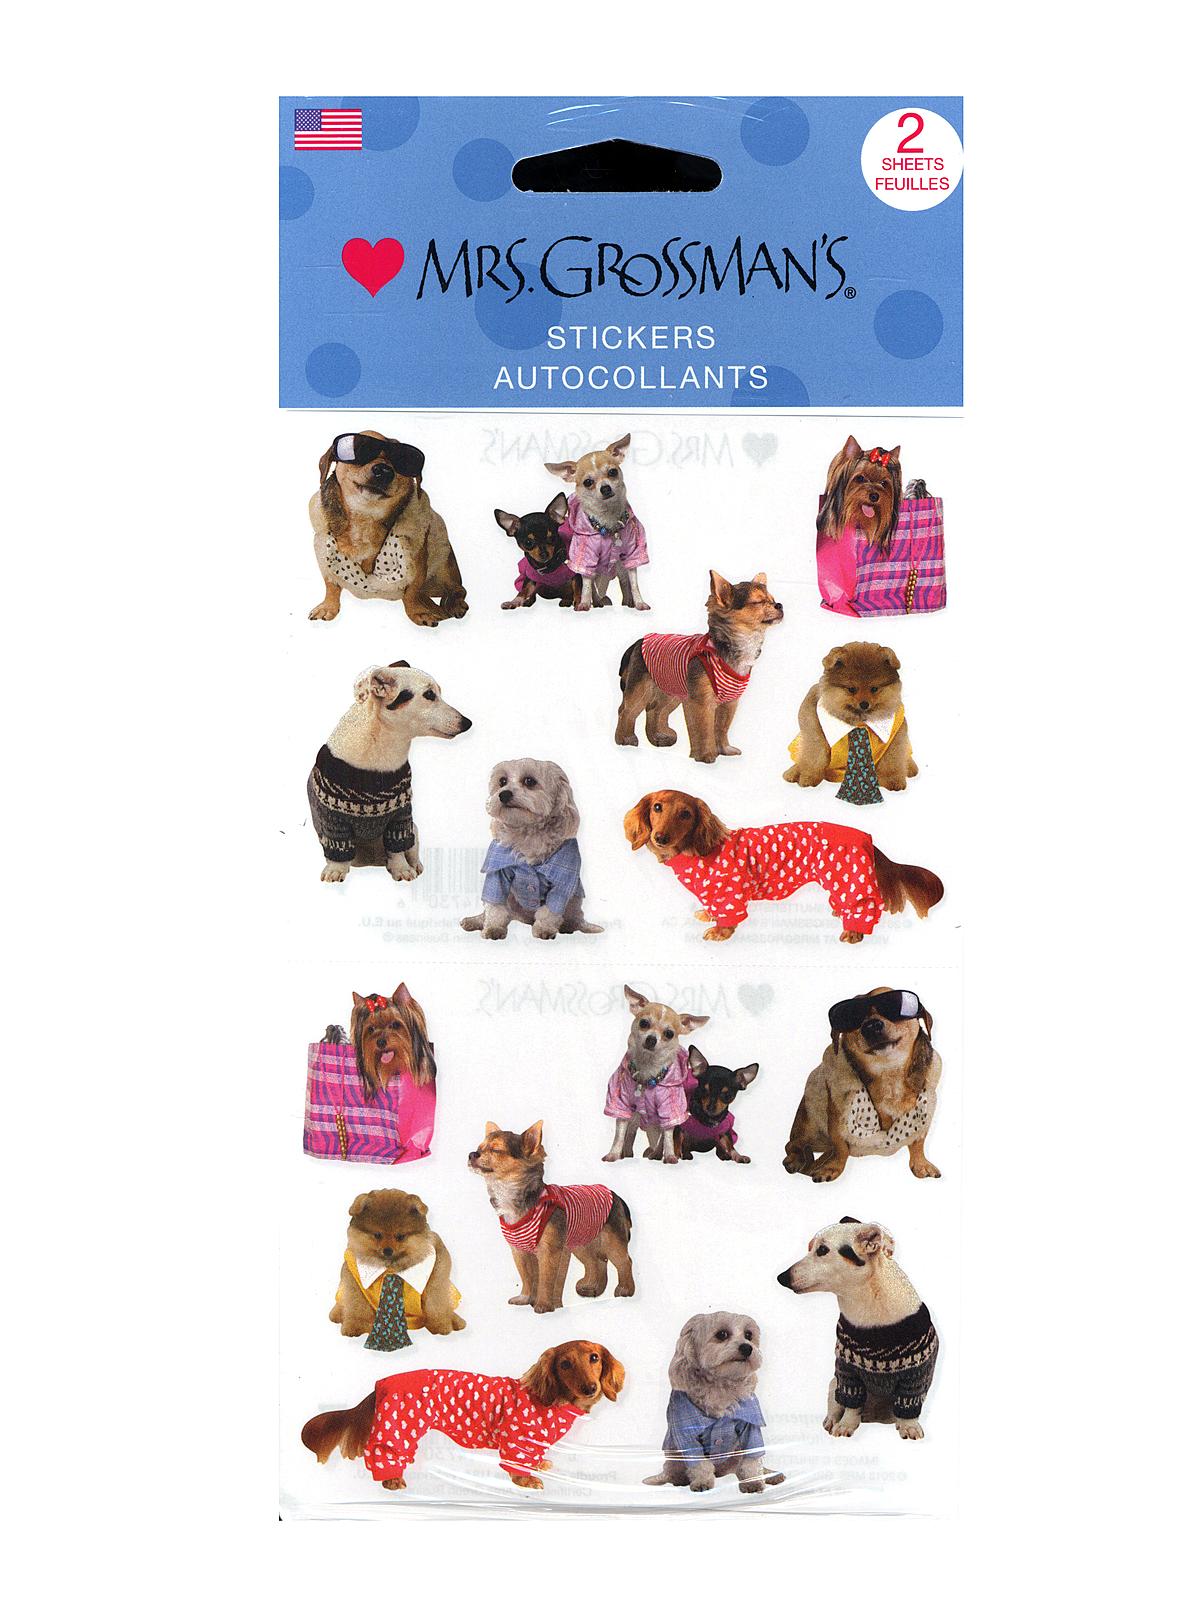 Giant Sticker Packs Photoessence Pampered Dogs 2 Sheets